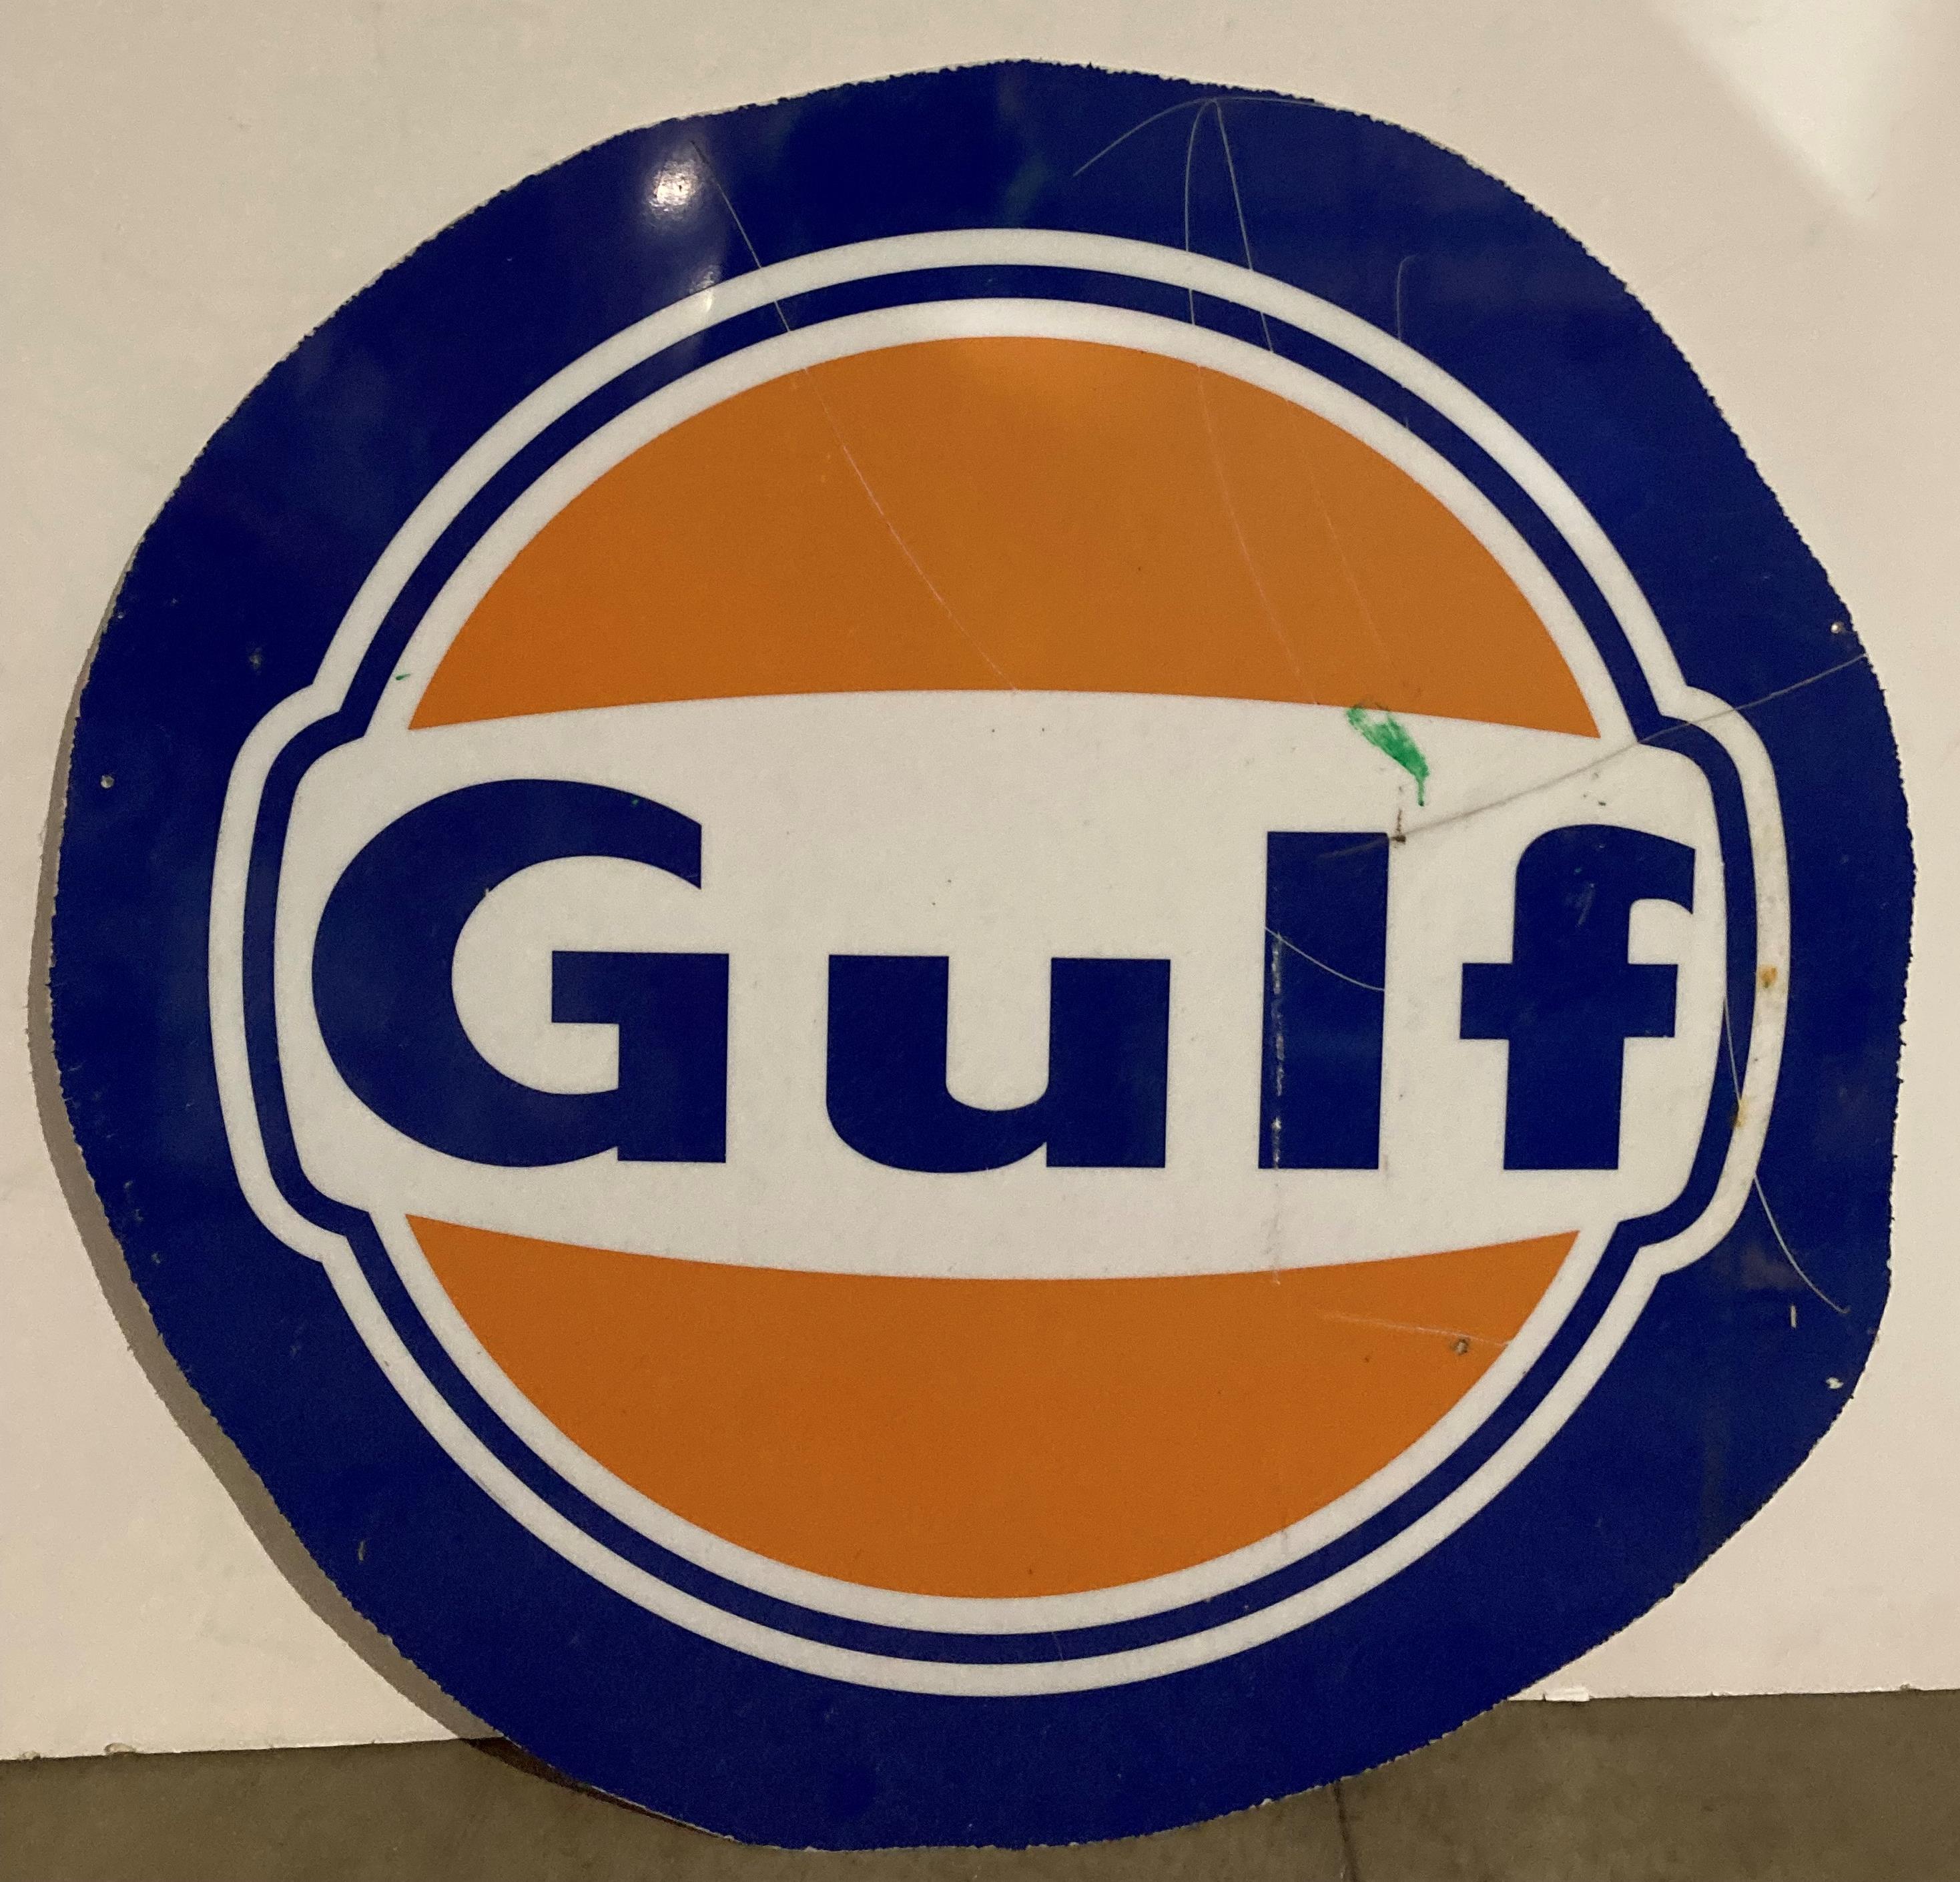 A Gulf perspex fuel sign with crack - approximate size 92cm diameter (saleroom location: MA7 wall)